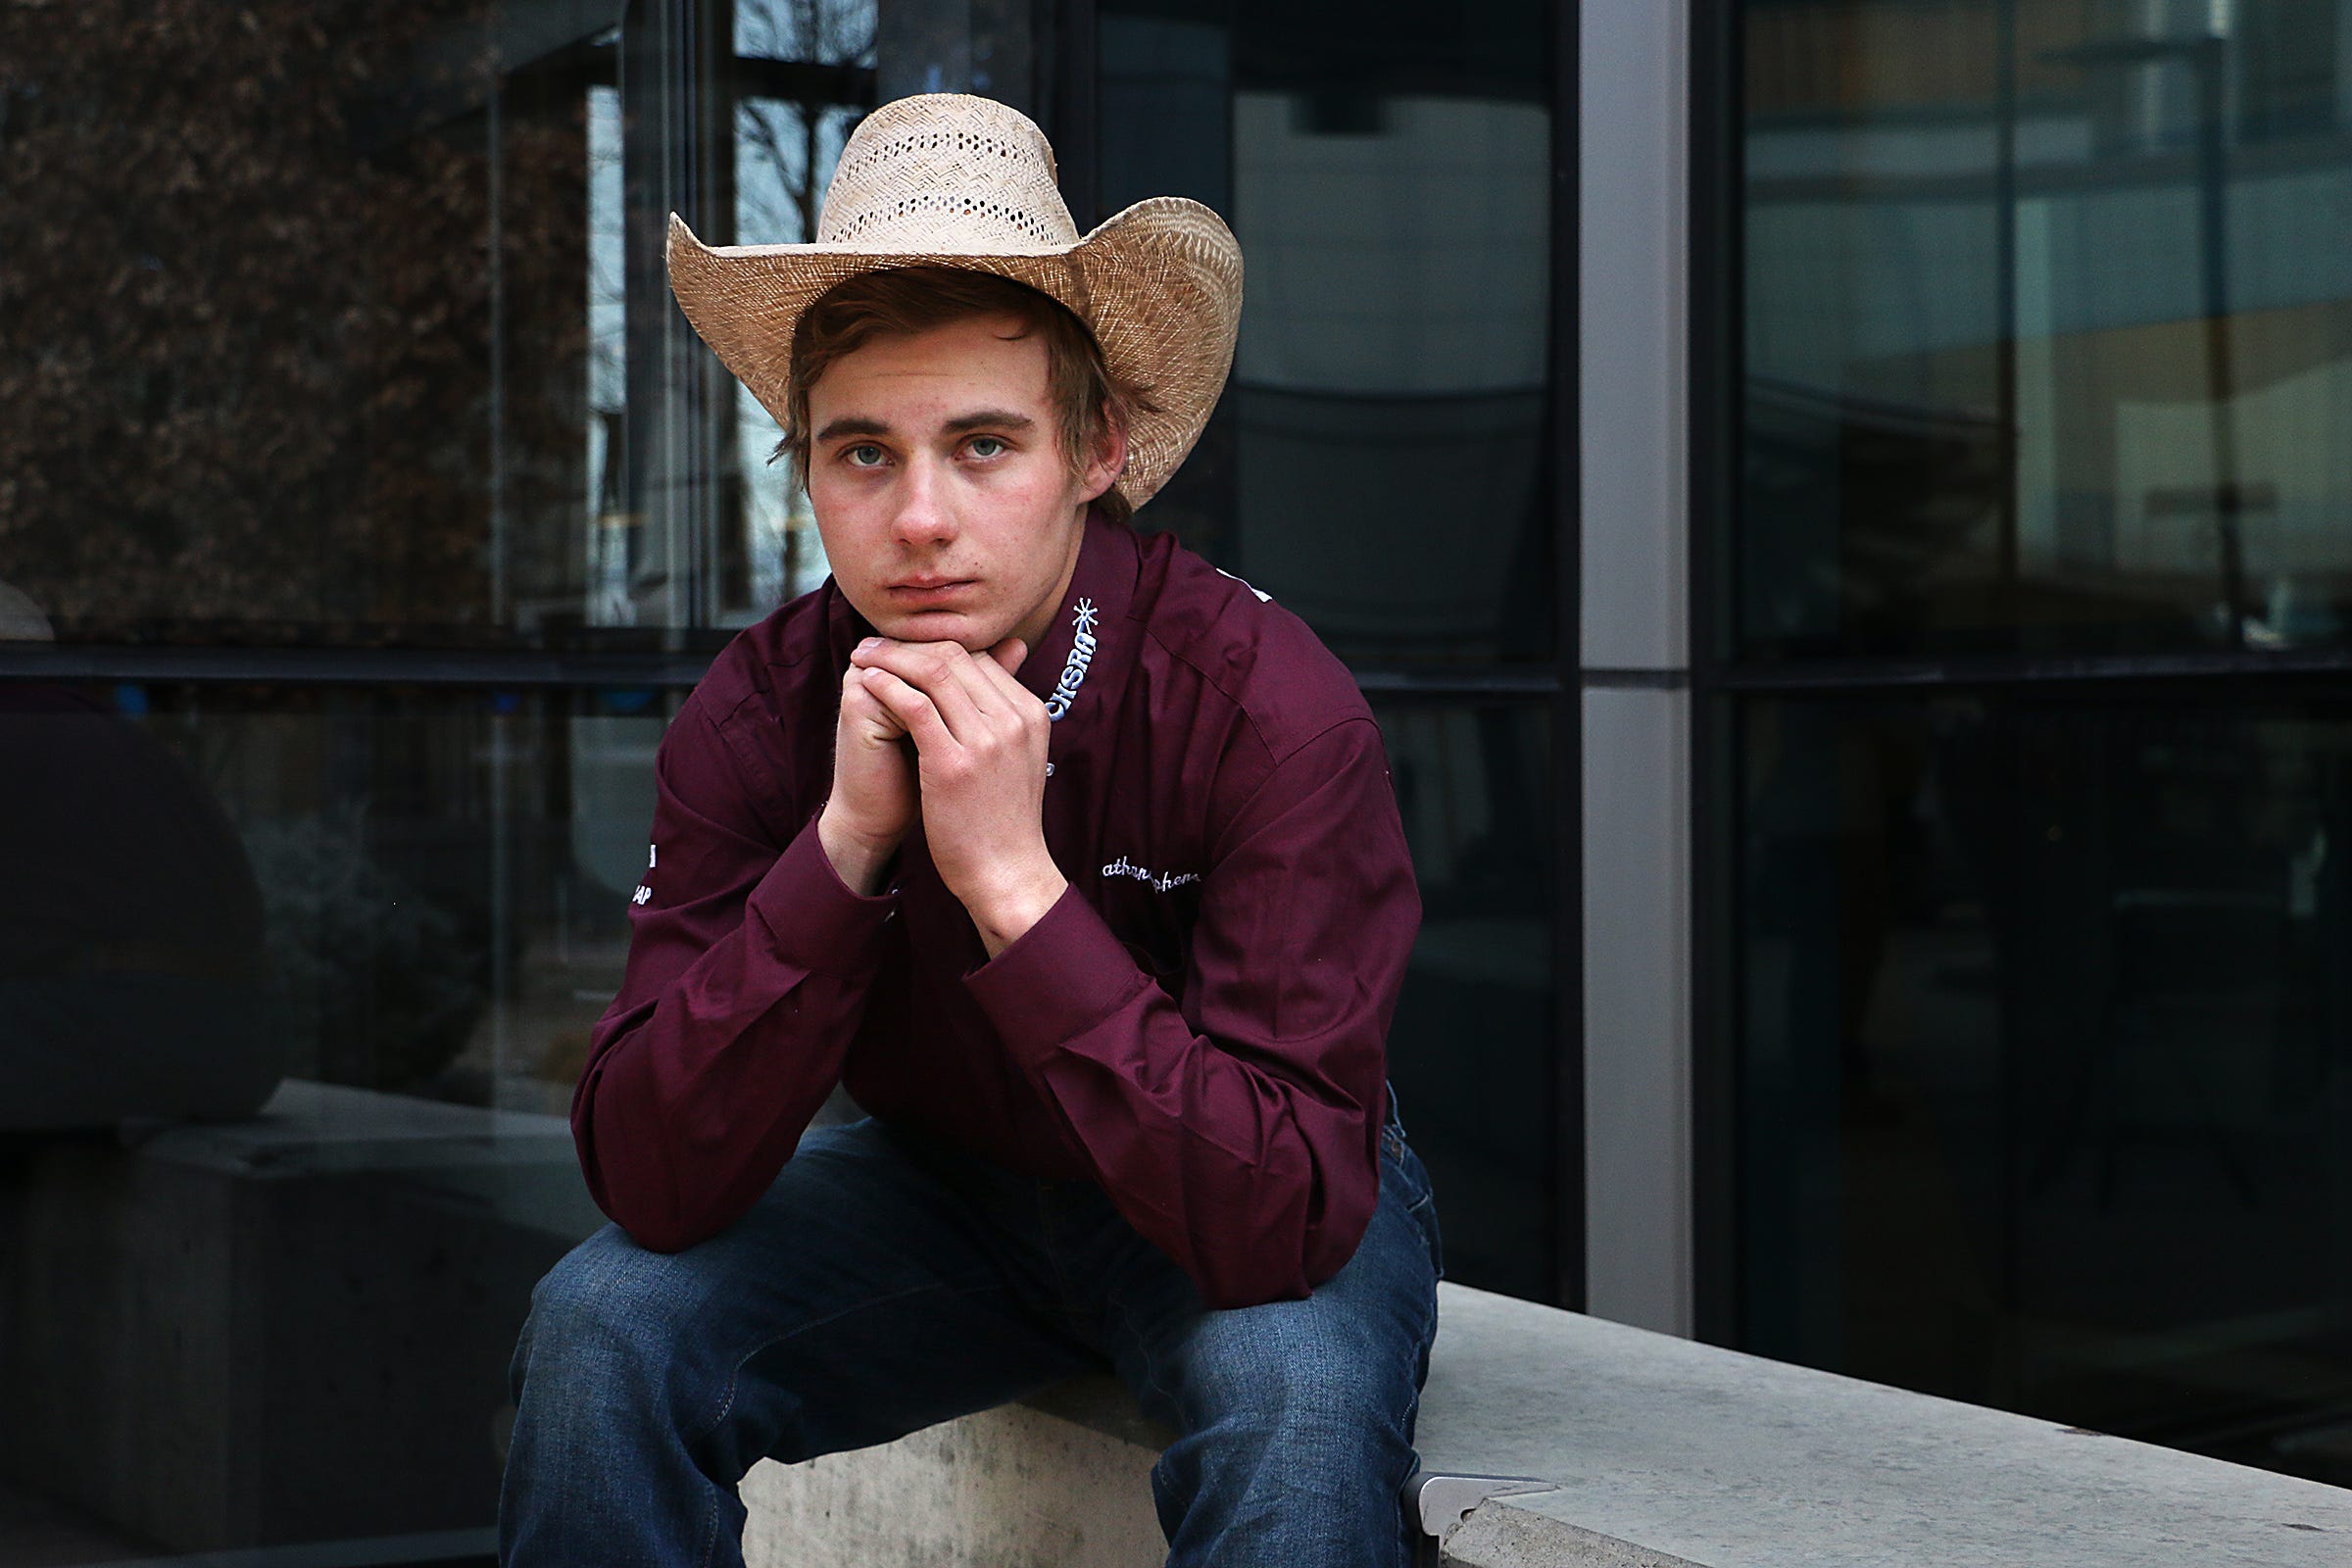 Nathanial Stephens, grandson of Judy Dover, poses for a portrait while sitting outside on a bench at Renown Regional Medical Center in Reno on Feb. 13, 2021.